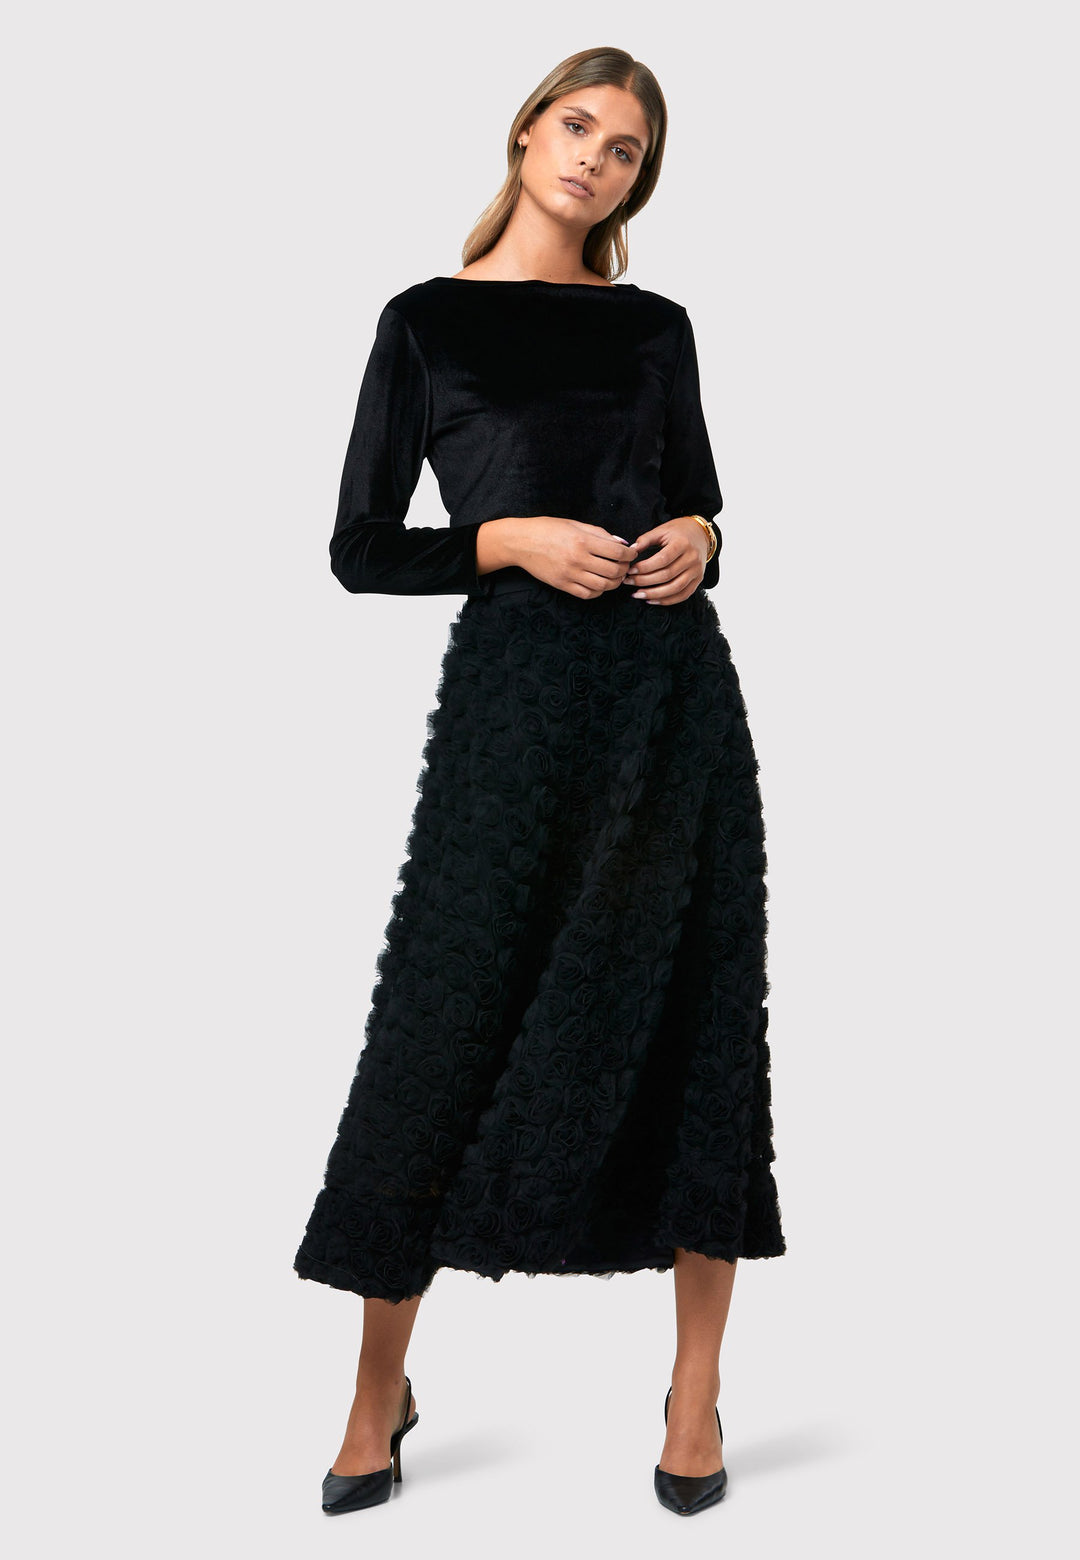 Introducing the Felicity Black Rose Skirt, a chic mid-calf length skirt inspired by 1950s fashion. Made from textured rose georgette fabric. An A-line silhouette reminiscent of the iconic 50s style. This statement piece features a convenient side seam zip, ensuring easy and comfortable wearing. Perfect for special occasions, it adds an elegant touch to your ensemble, making you the center of attention with its captivating beauty.